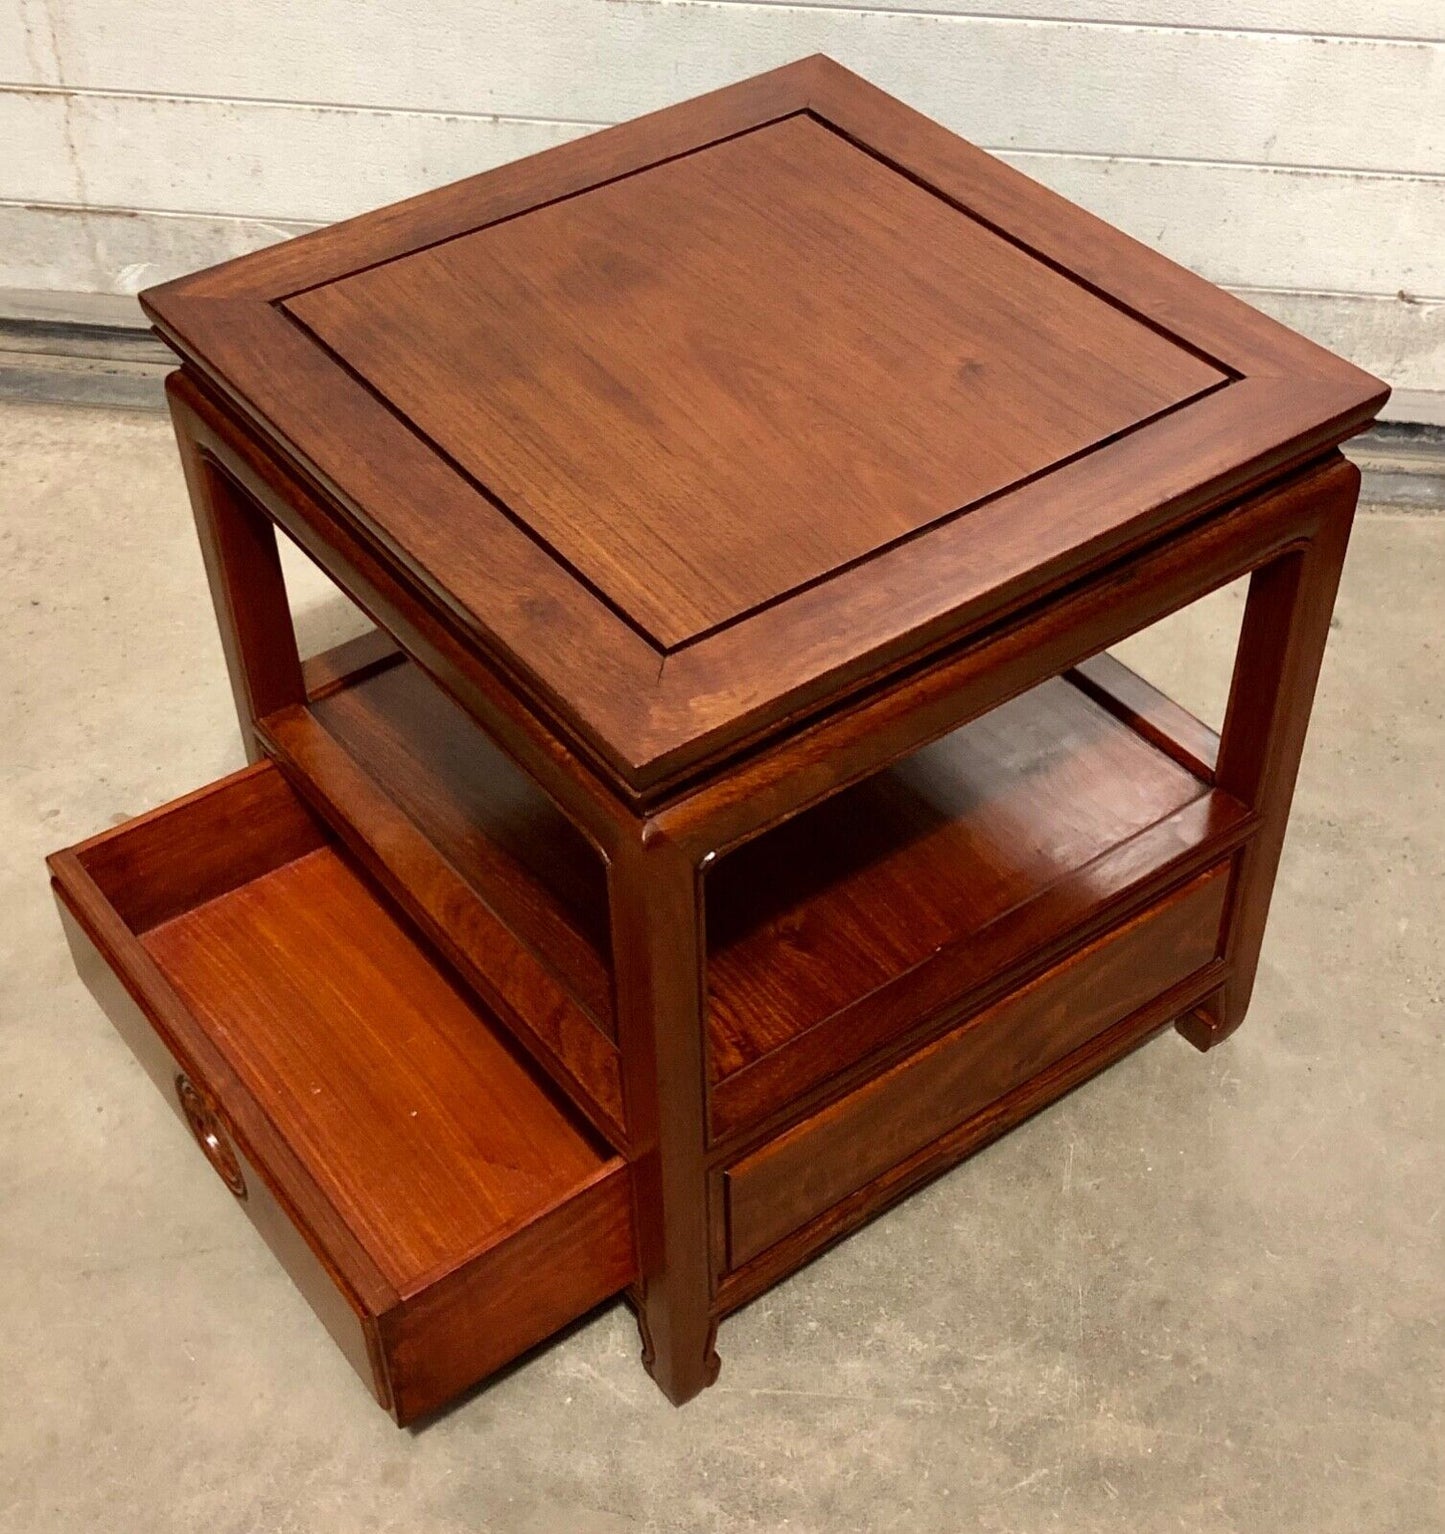 000736....Handsome Pair Of Chinese Rosewood Bedside Tables / Lamp Tables